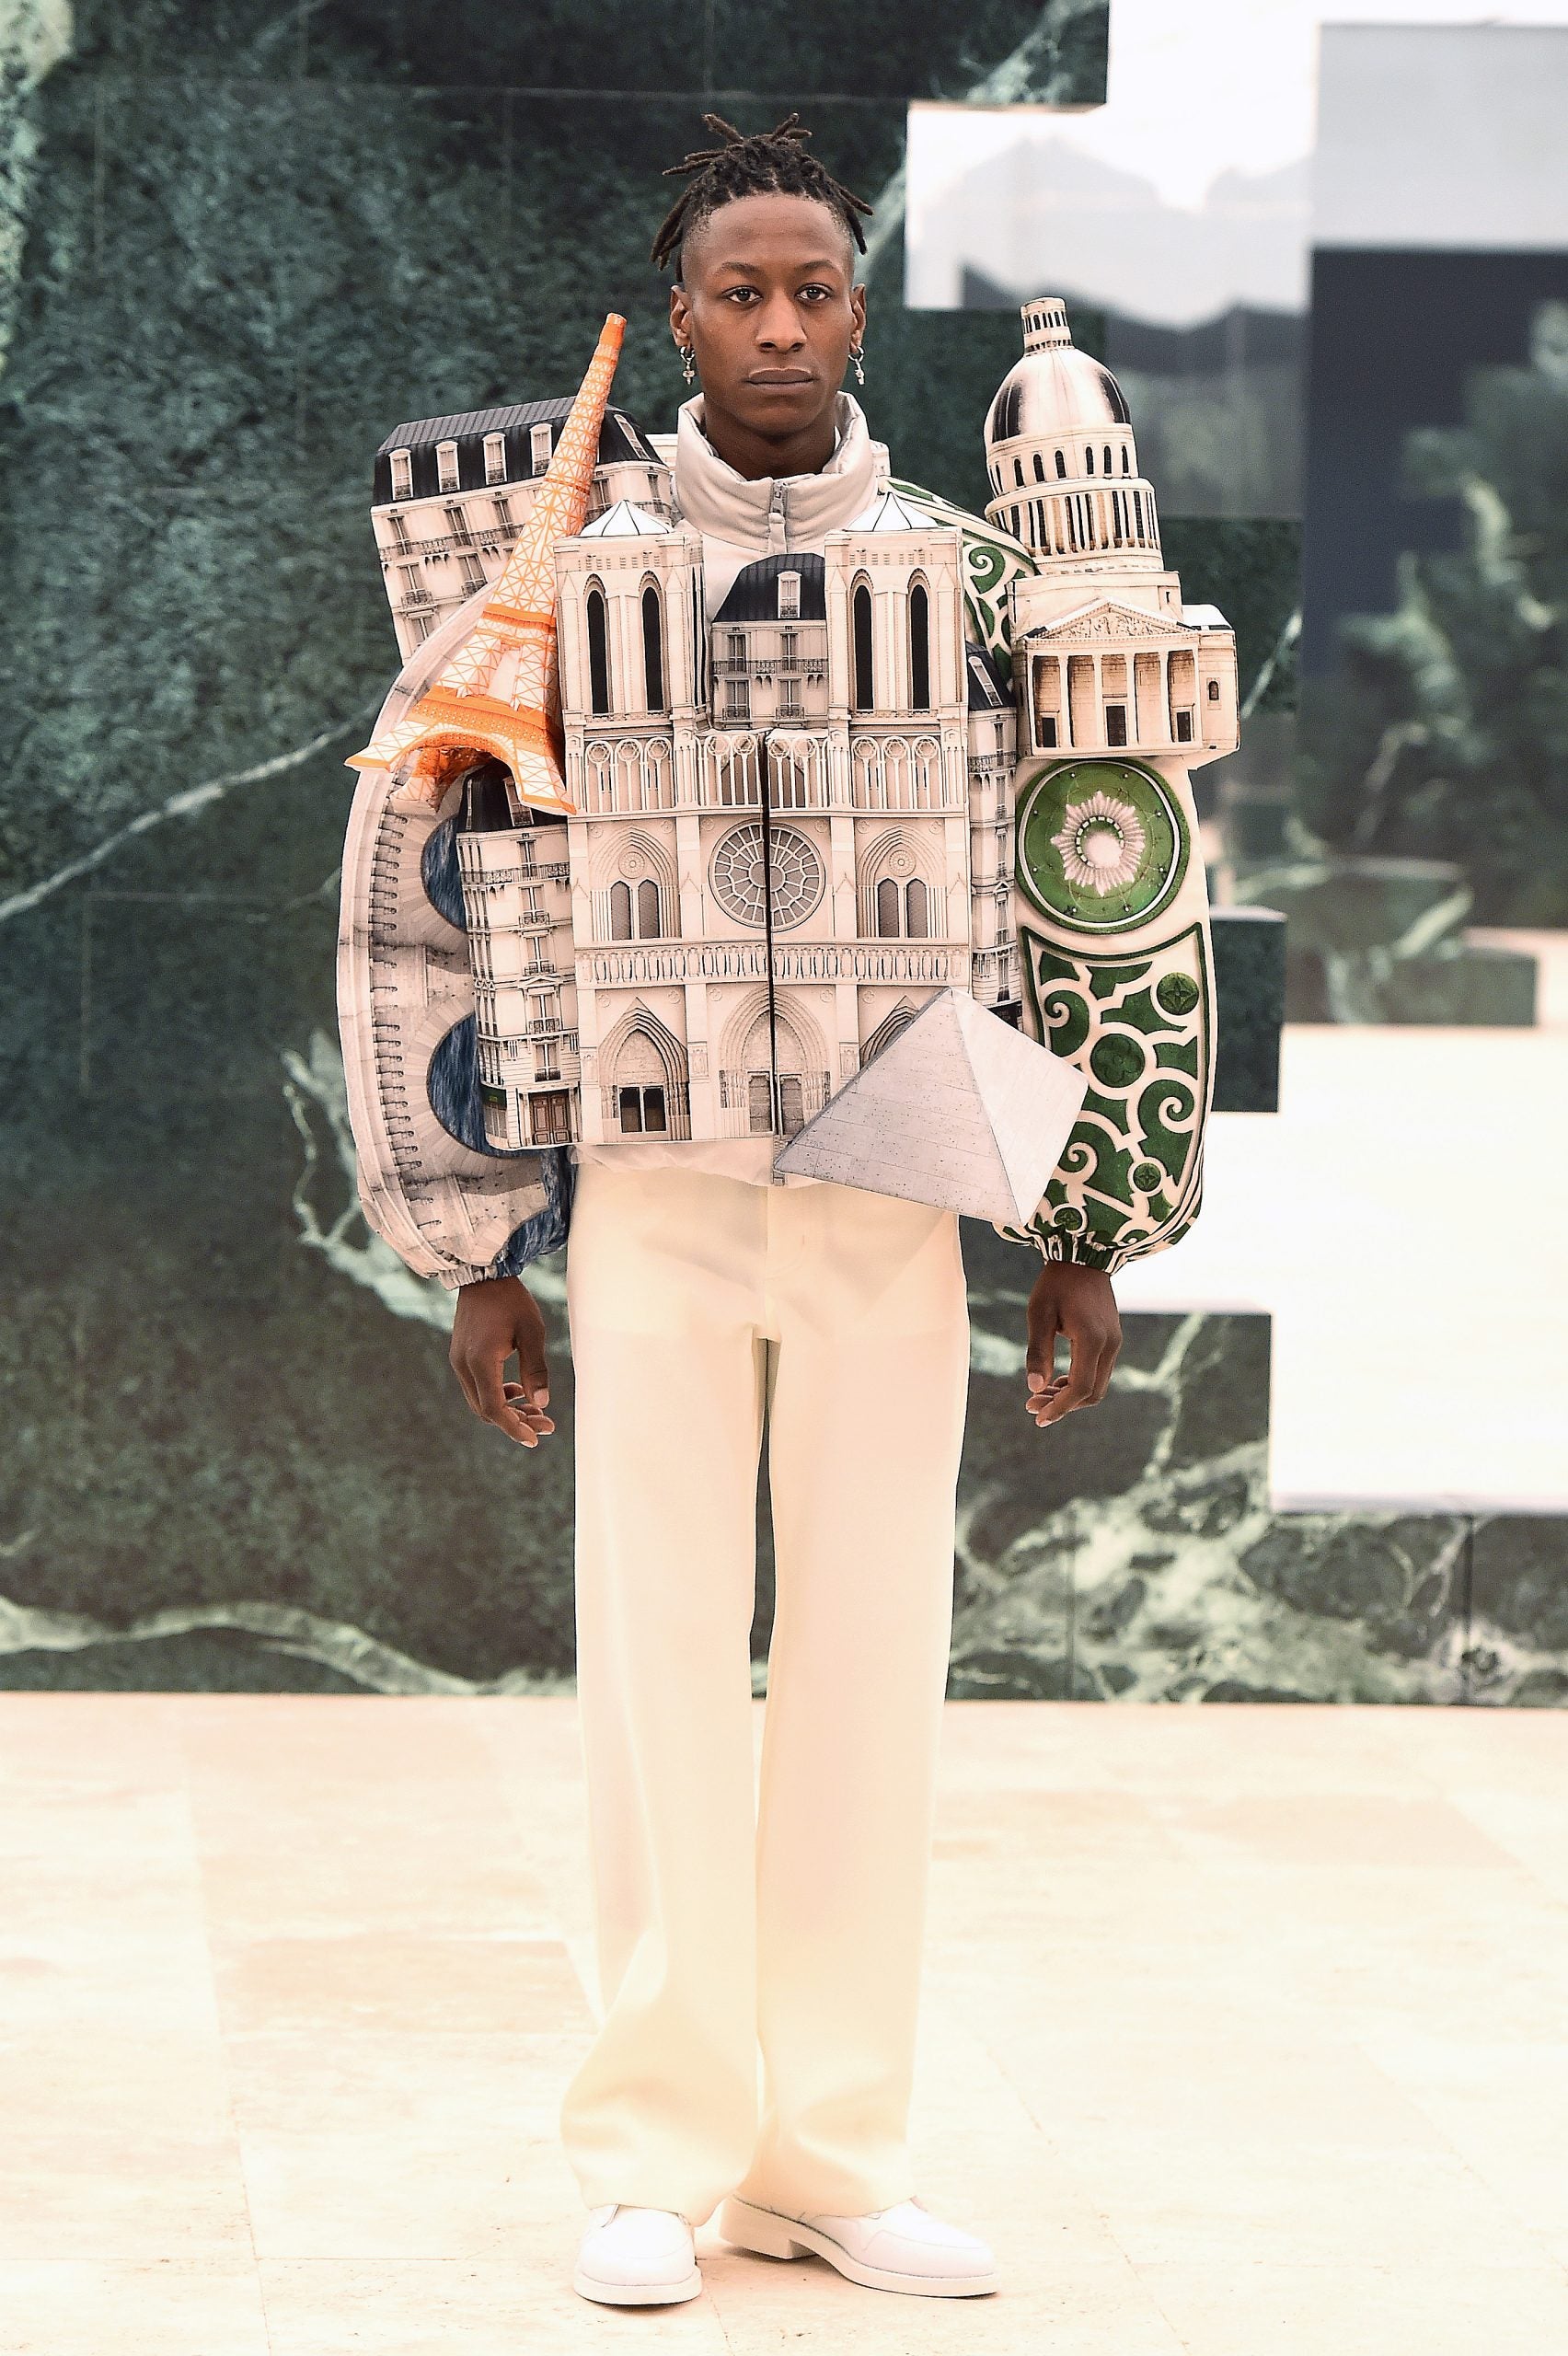 Virgil Abloh's newest collection with Louis Vuitton features some high  fashion hockey glove outfits - Article - Bardown